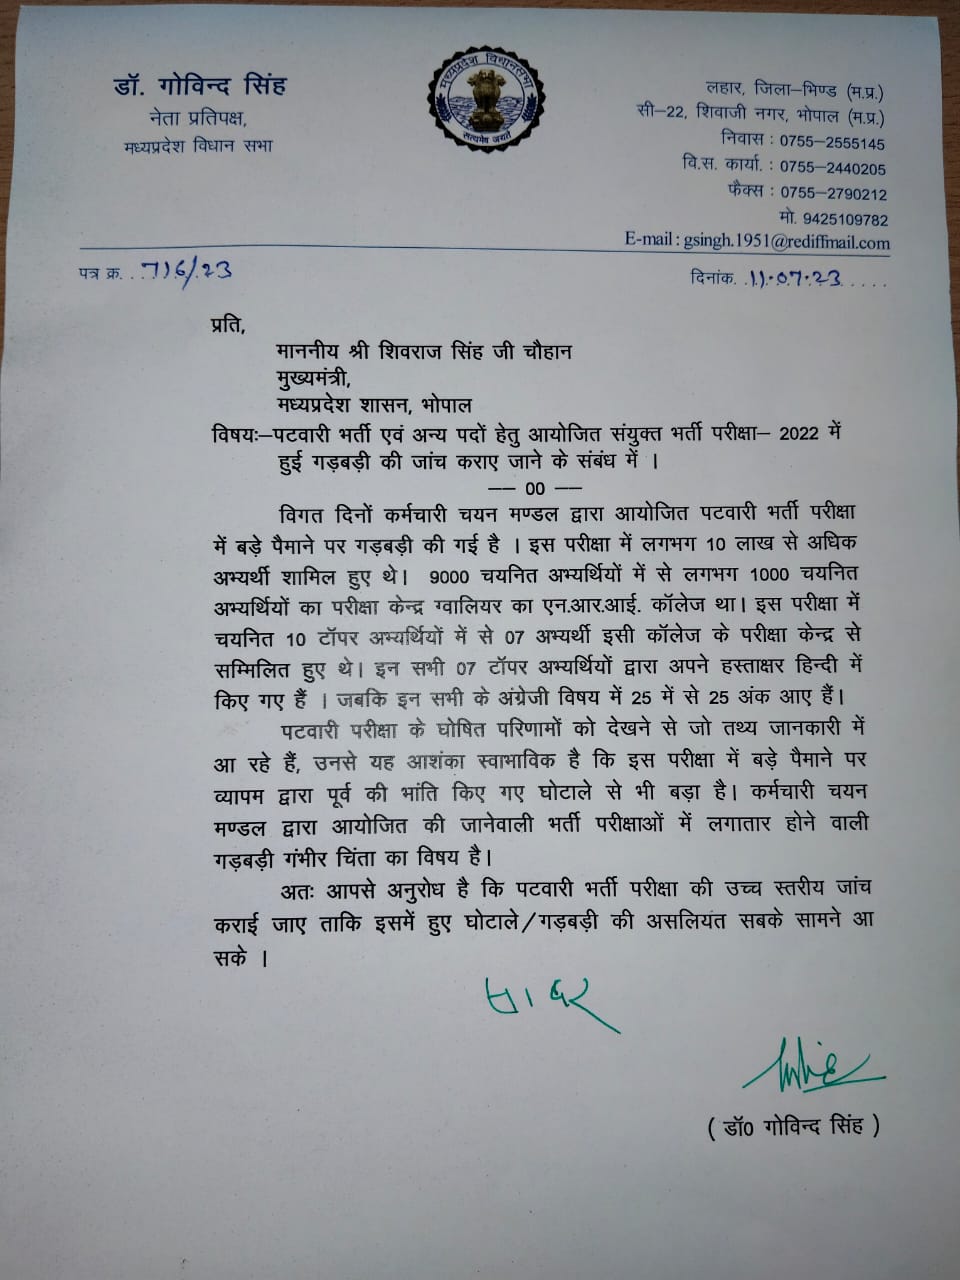 Govind Singh wrote a letter to CM